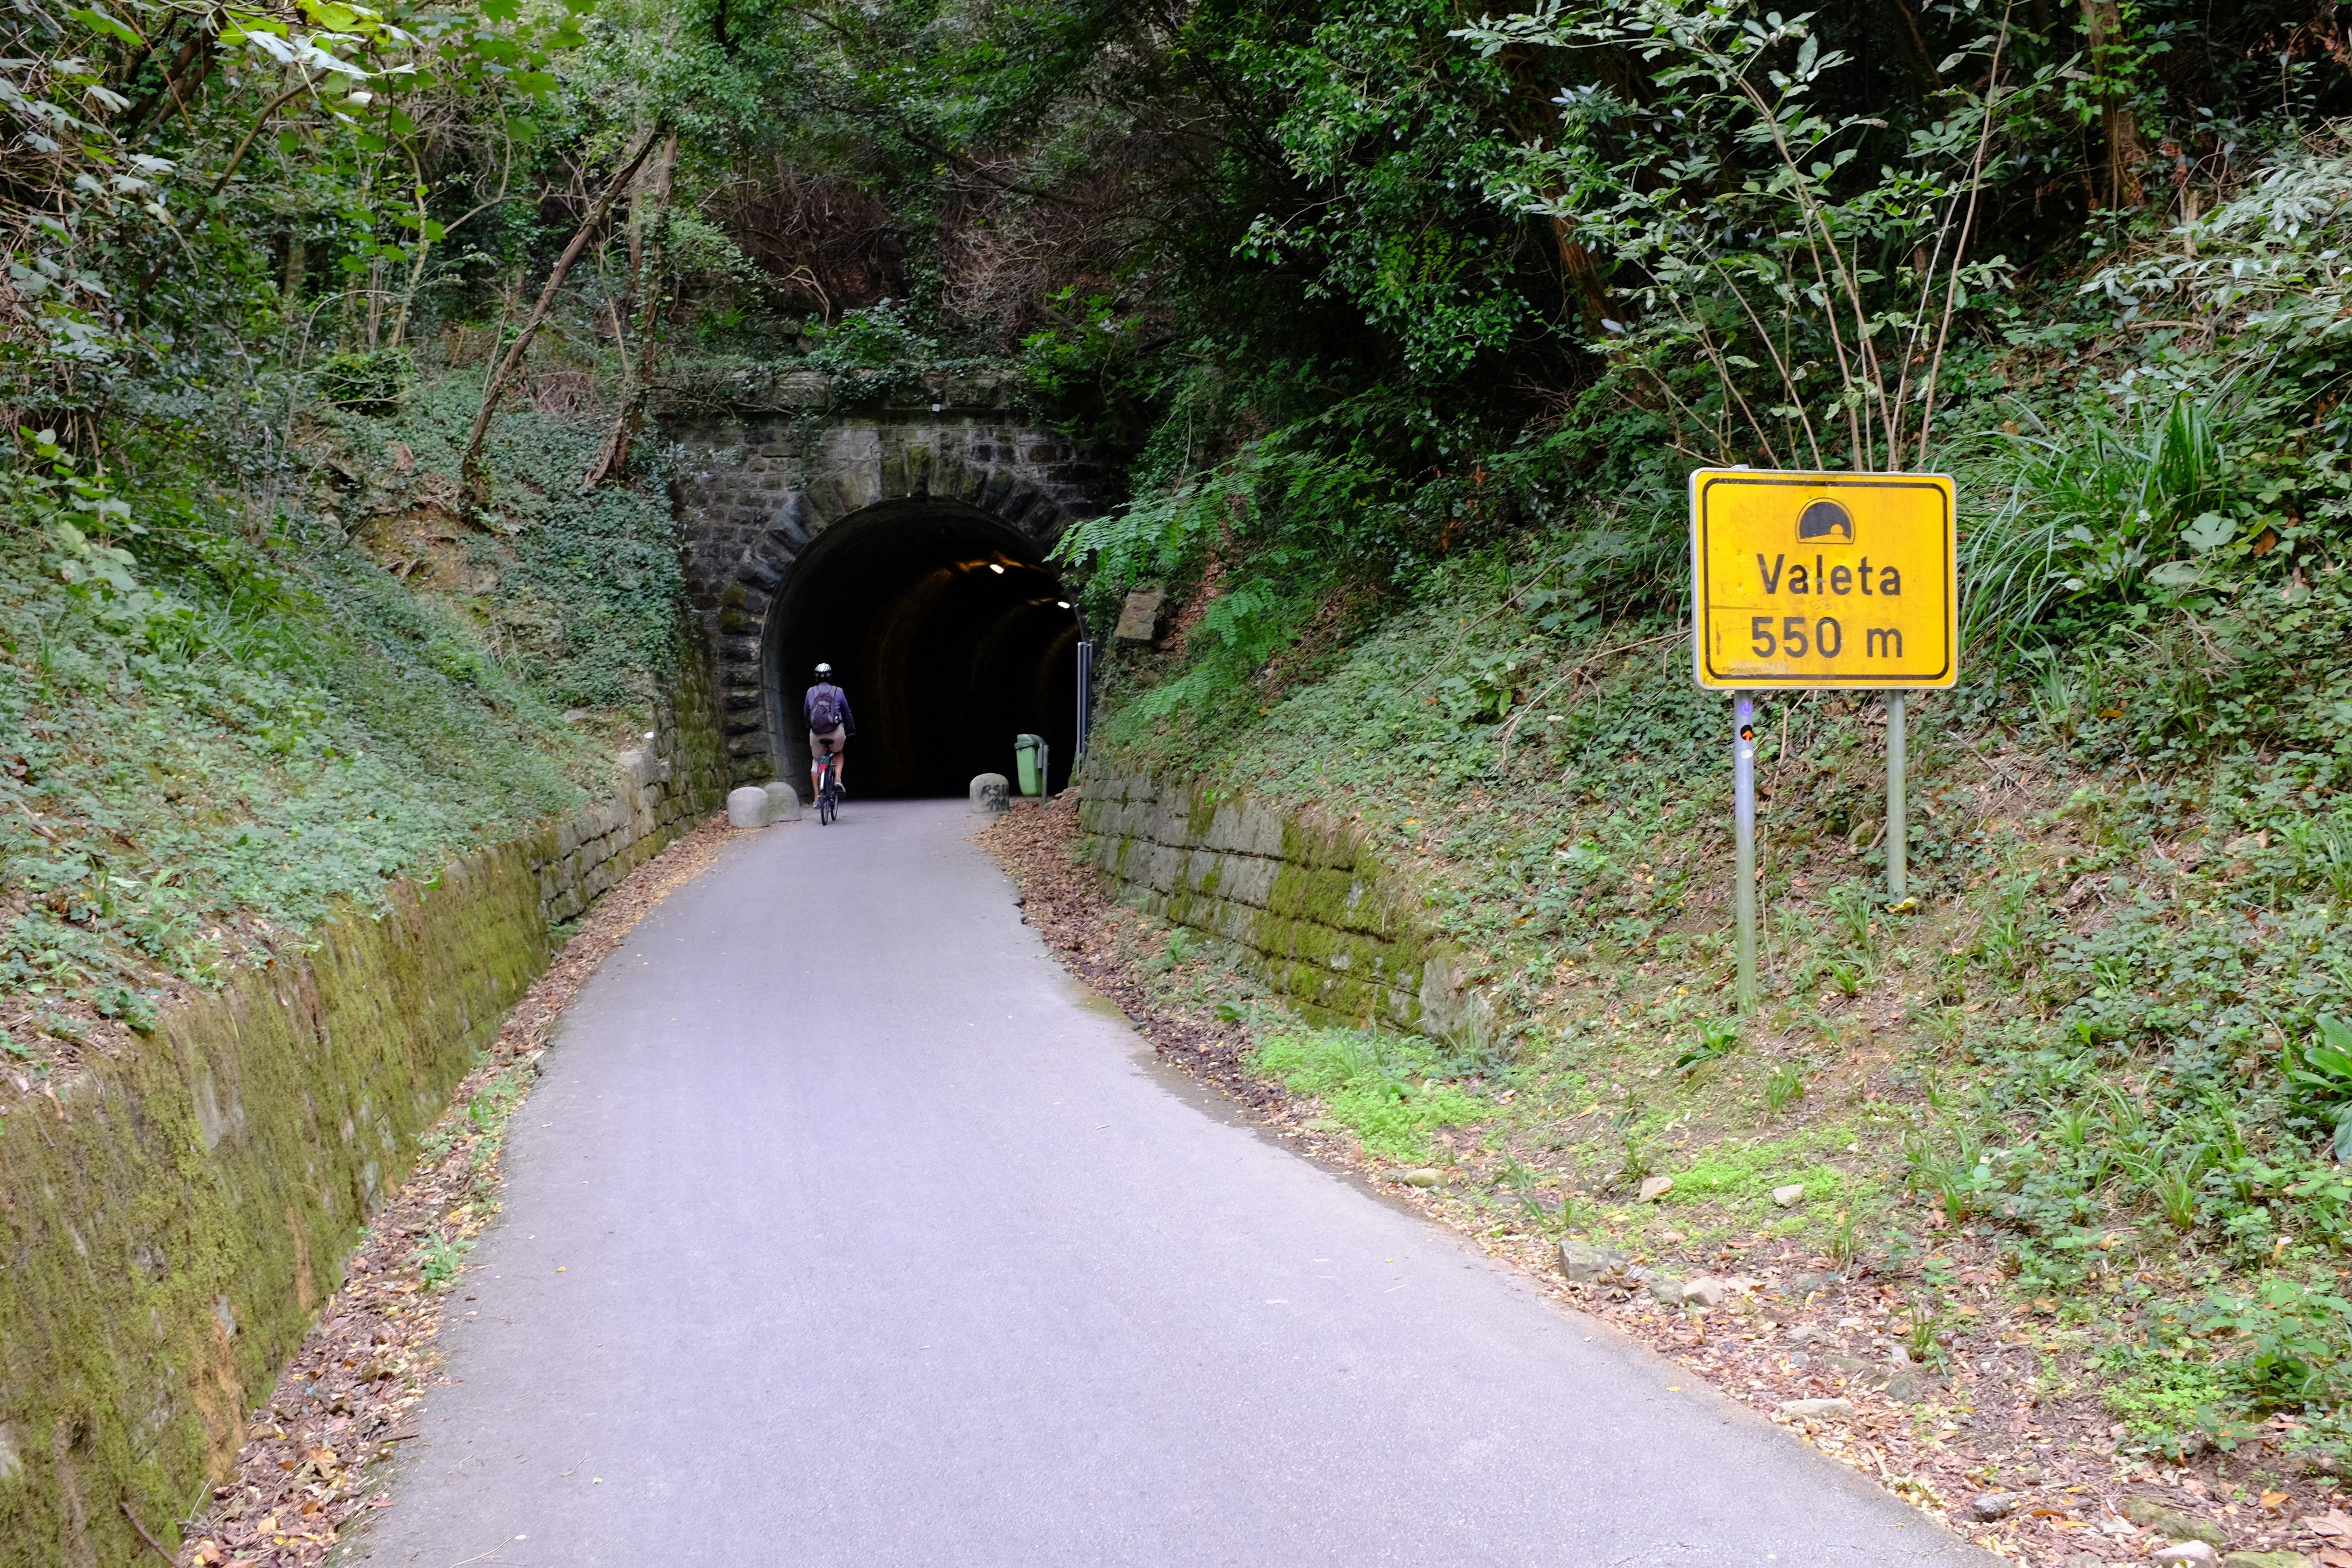 A cyclist enters the Velta tunnel, the longest on the Parenzana Trail. A paved road cuts into the hillside held back by mossy stone retaining walls on either side and into a stone arch at the tunnel mouth. A yellow sign reads Velta 550 m with an illustration of a tunnel